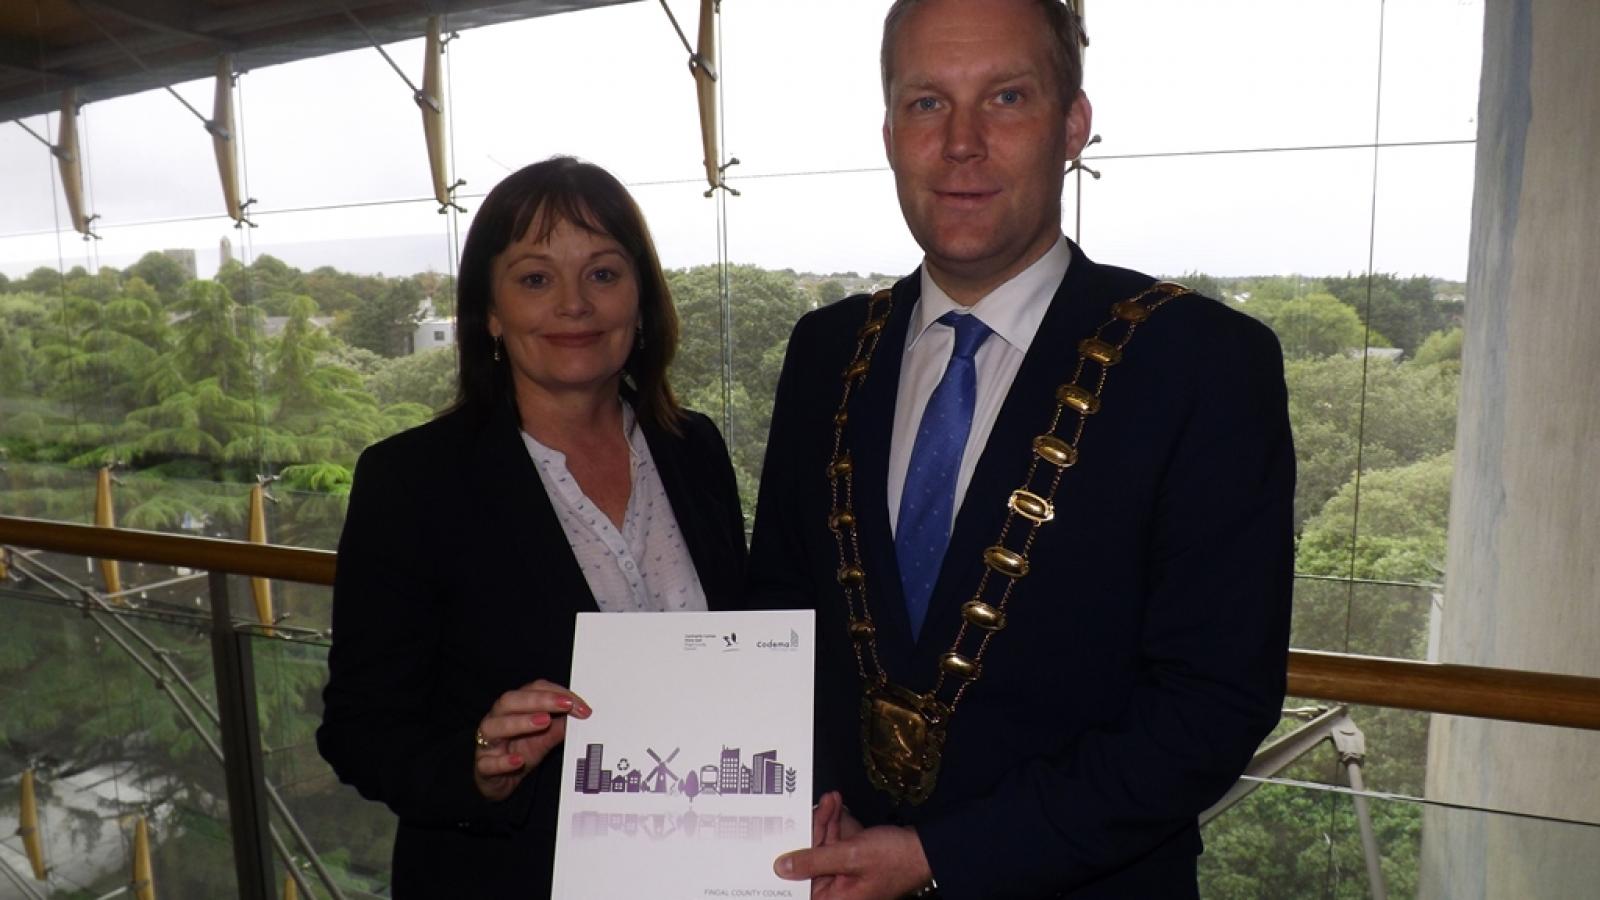 Pictured at the launch of Fingal County Council’s Climate Change Action Plan 2019-2024 are Interim Chief Executive AnnMarie Farrelly and Mayor of Fingal Cllr Eoghan O’Brien.